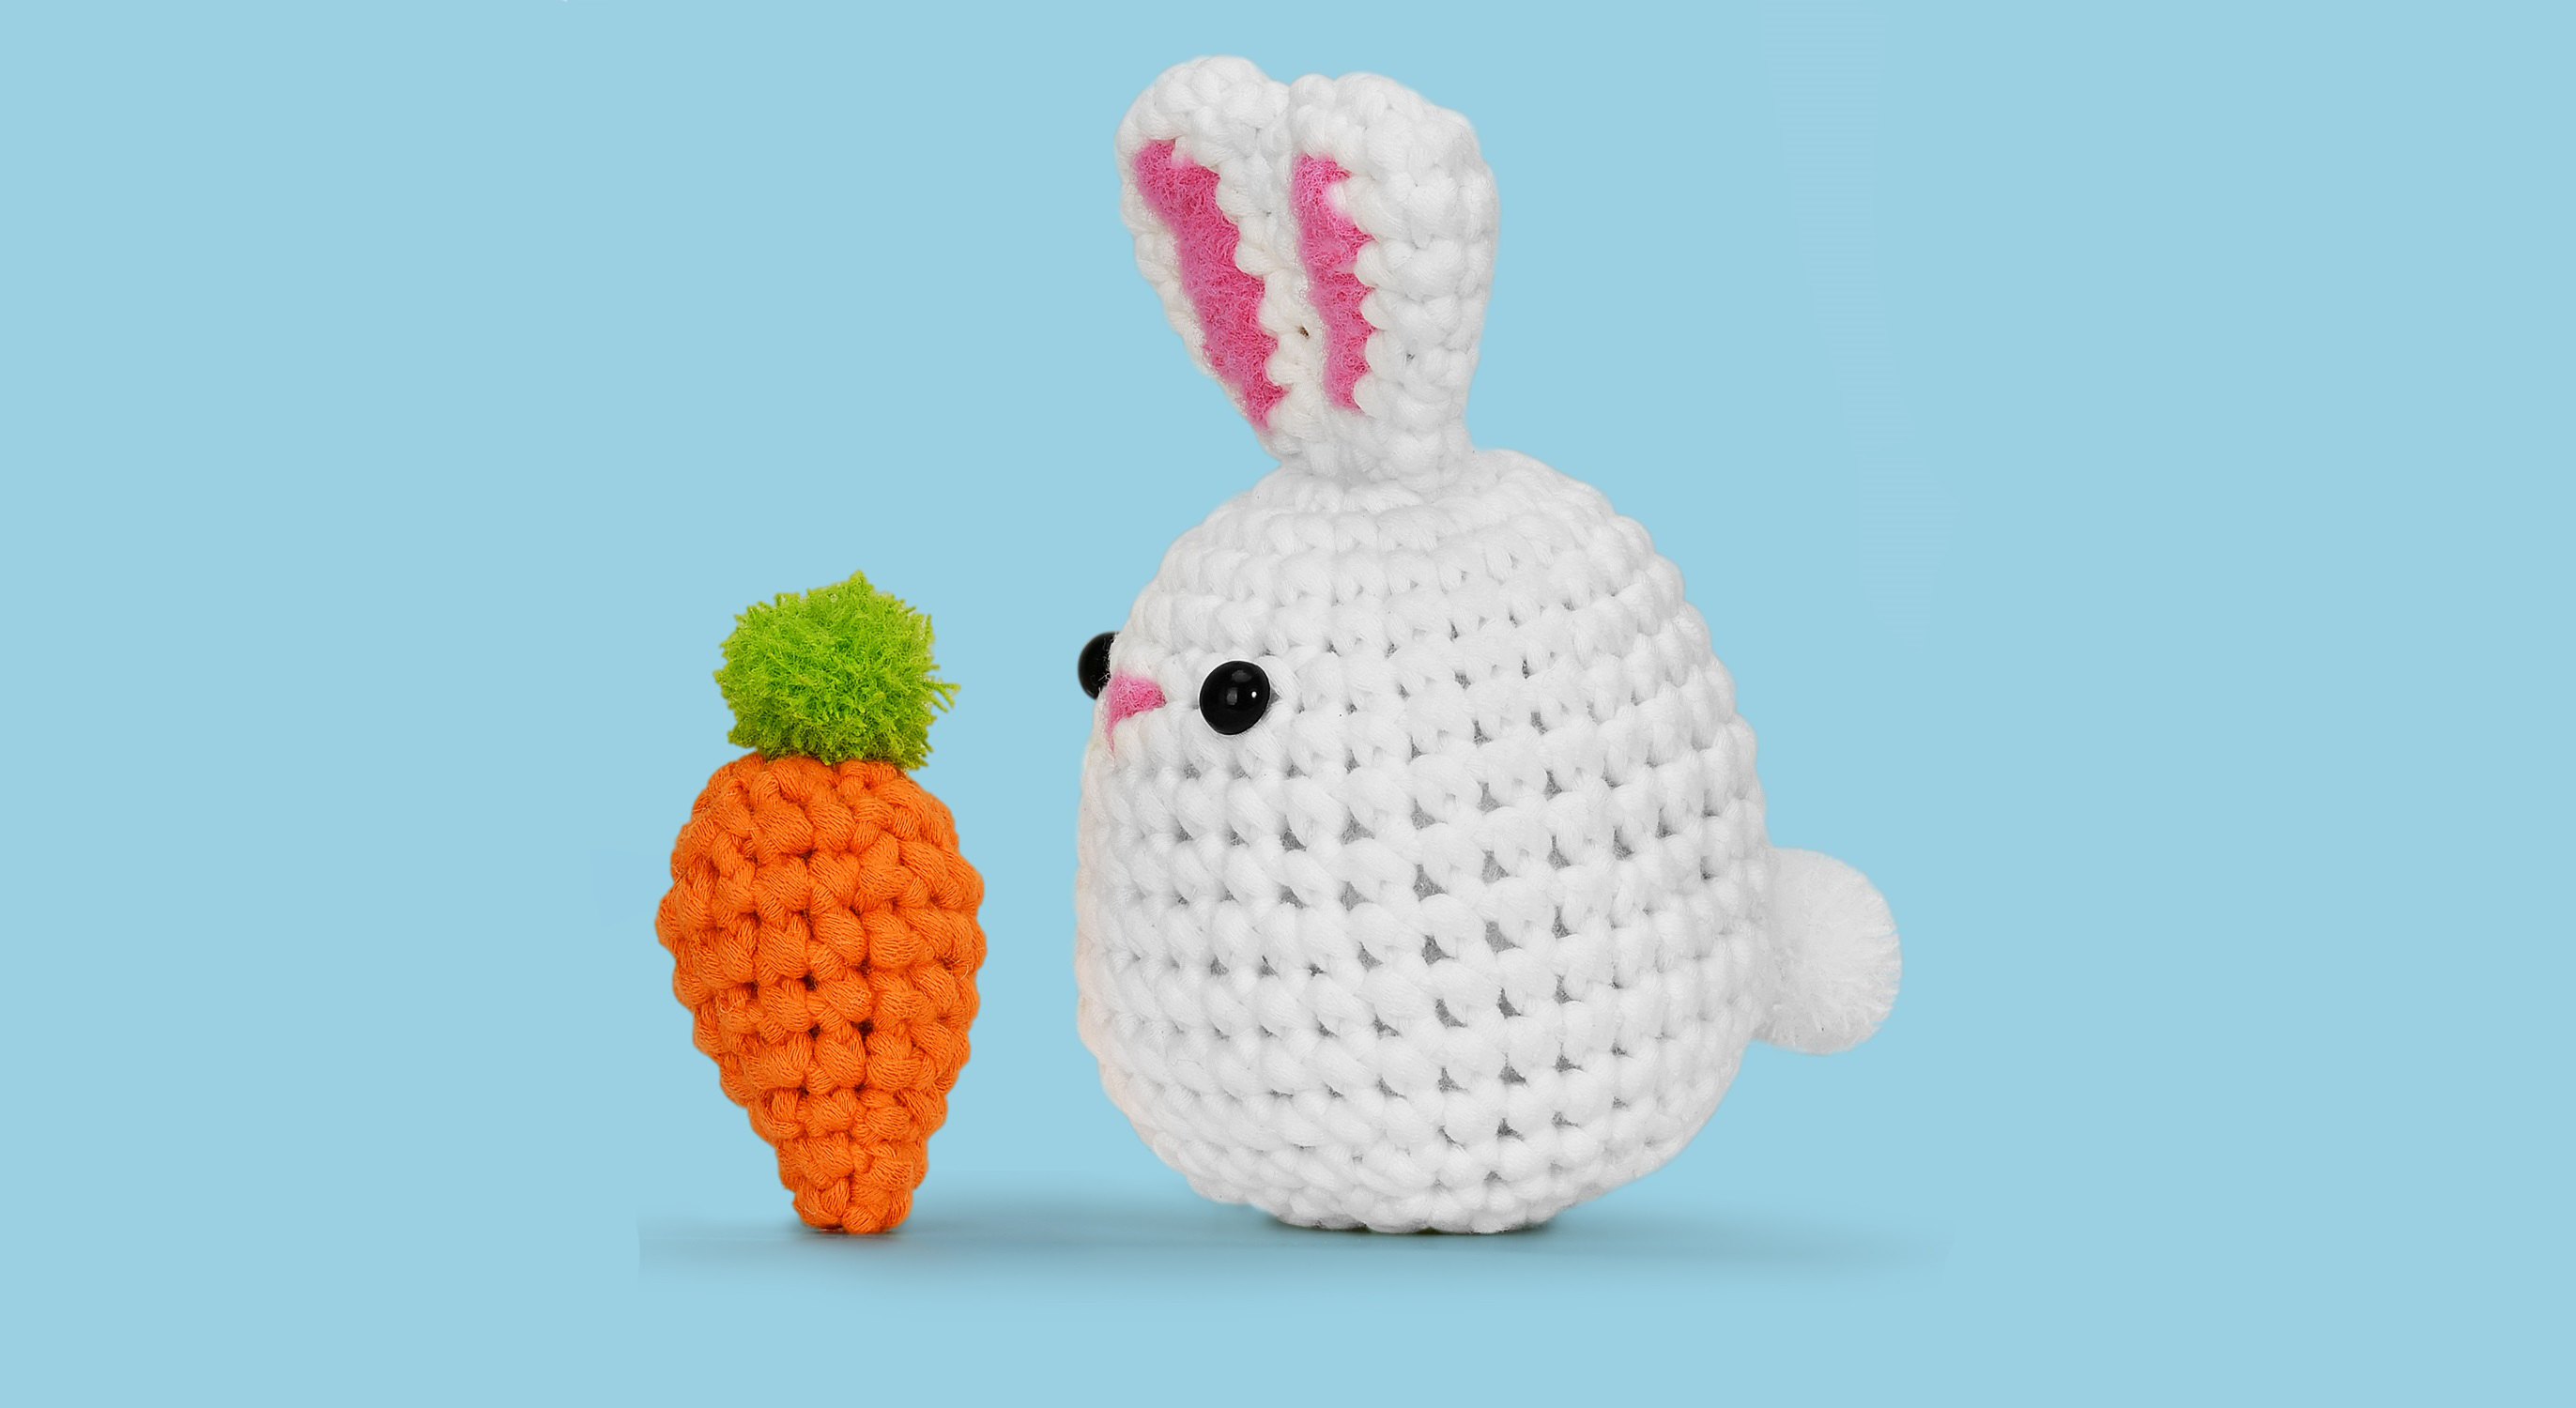 Crochet Kits for Beginners - All-in-One Stuffed Animal Knitting Sets -  Step-by-Step Video Tutorials DIY, The Chick Crochet Kits for Kids and Adults